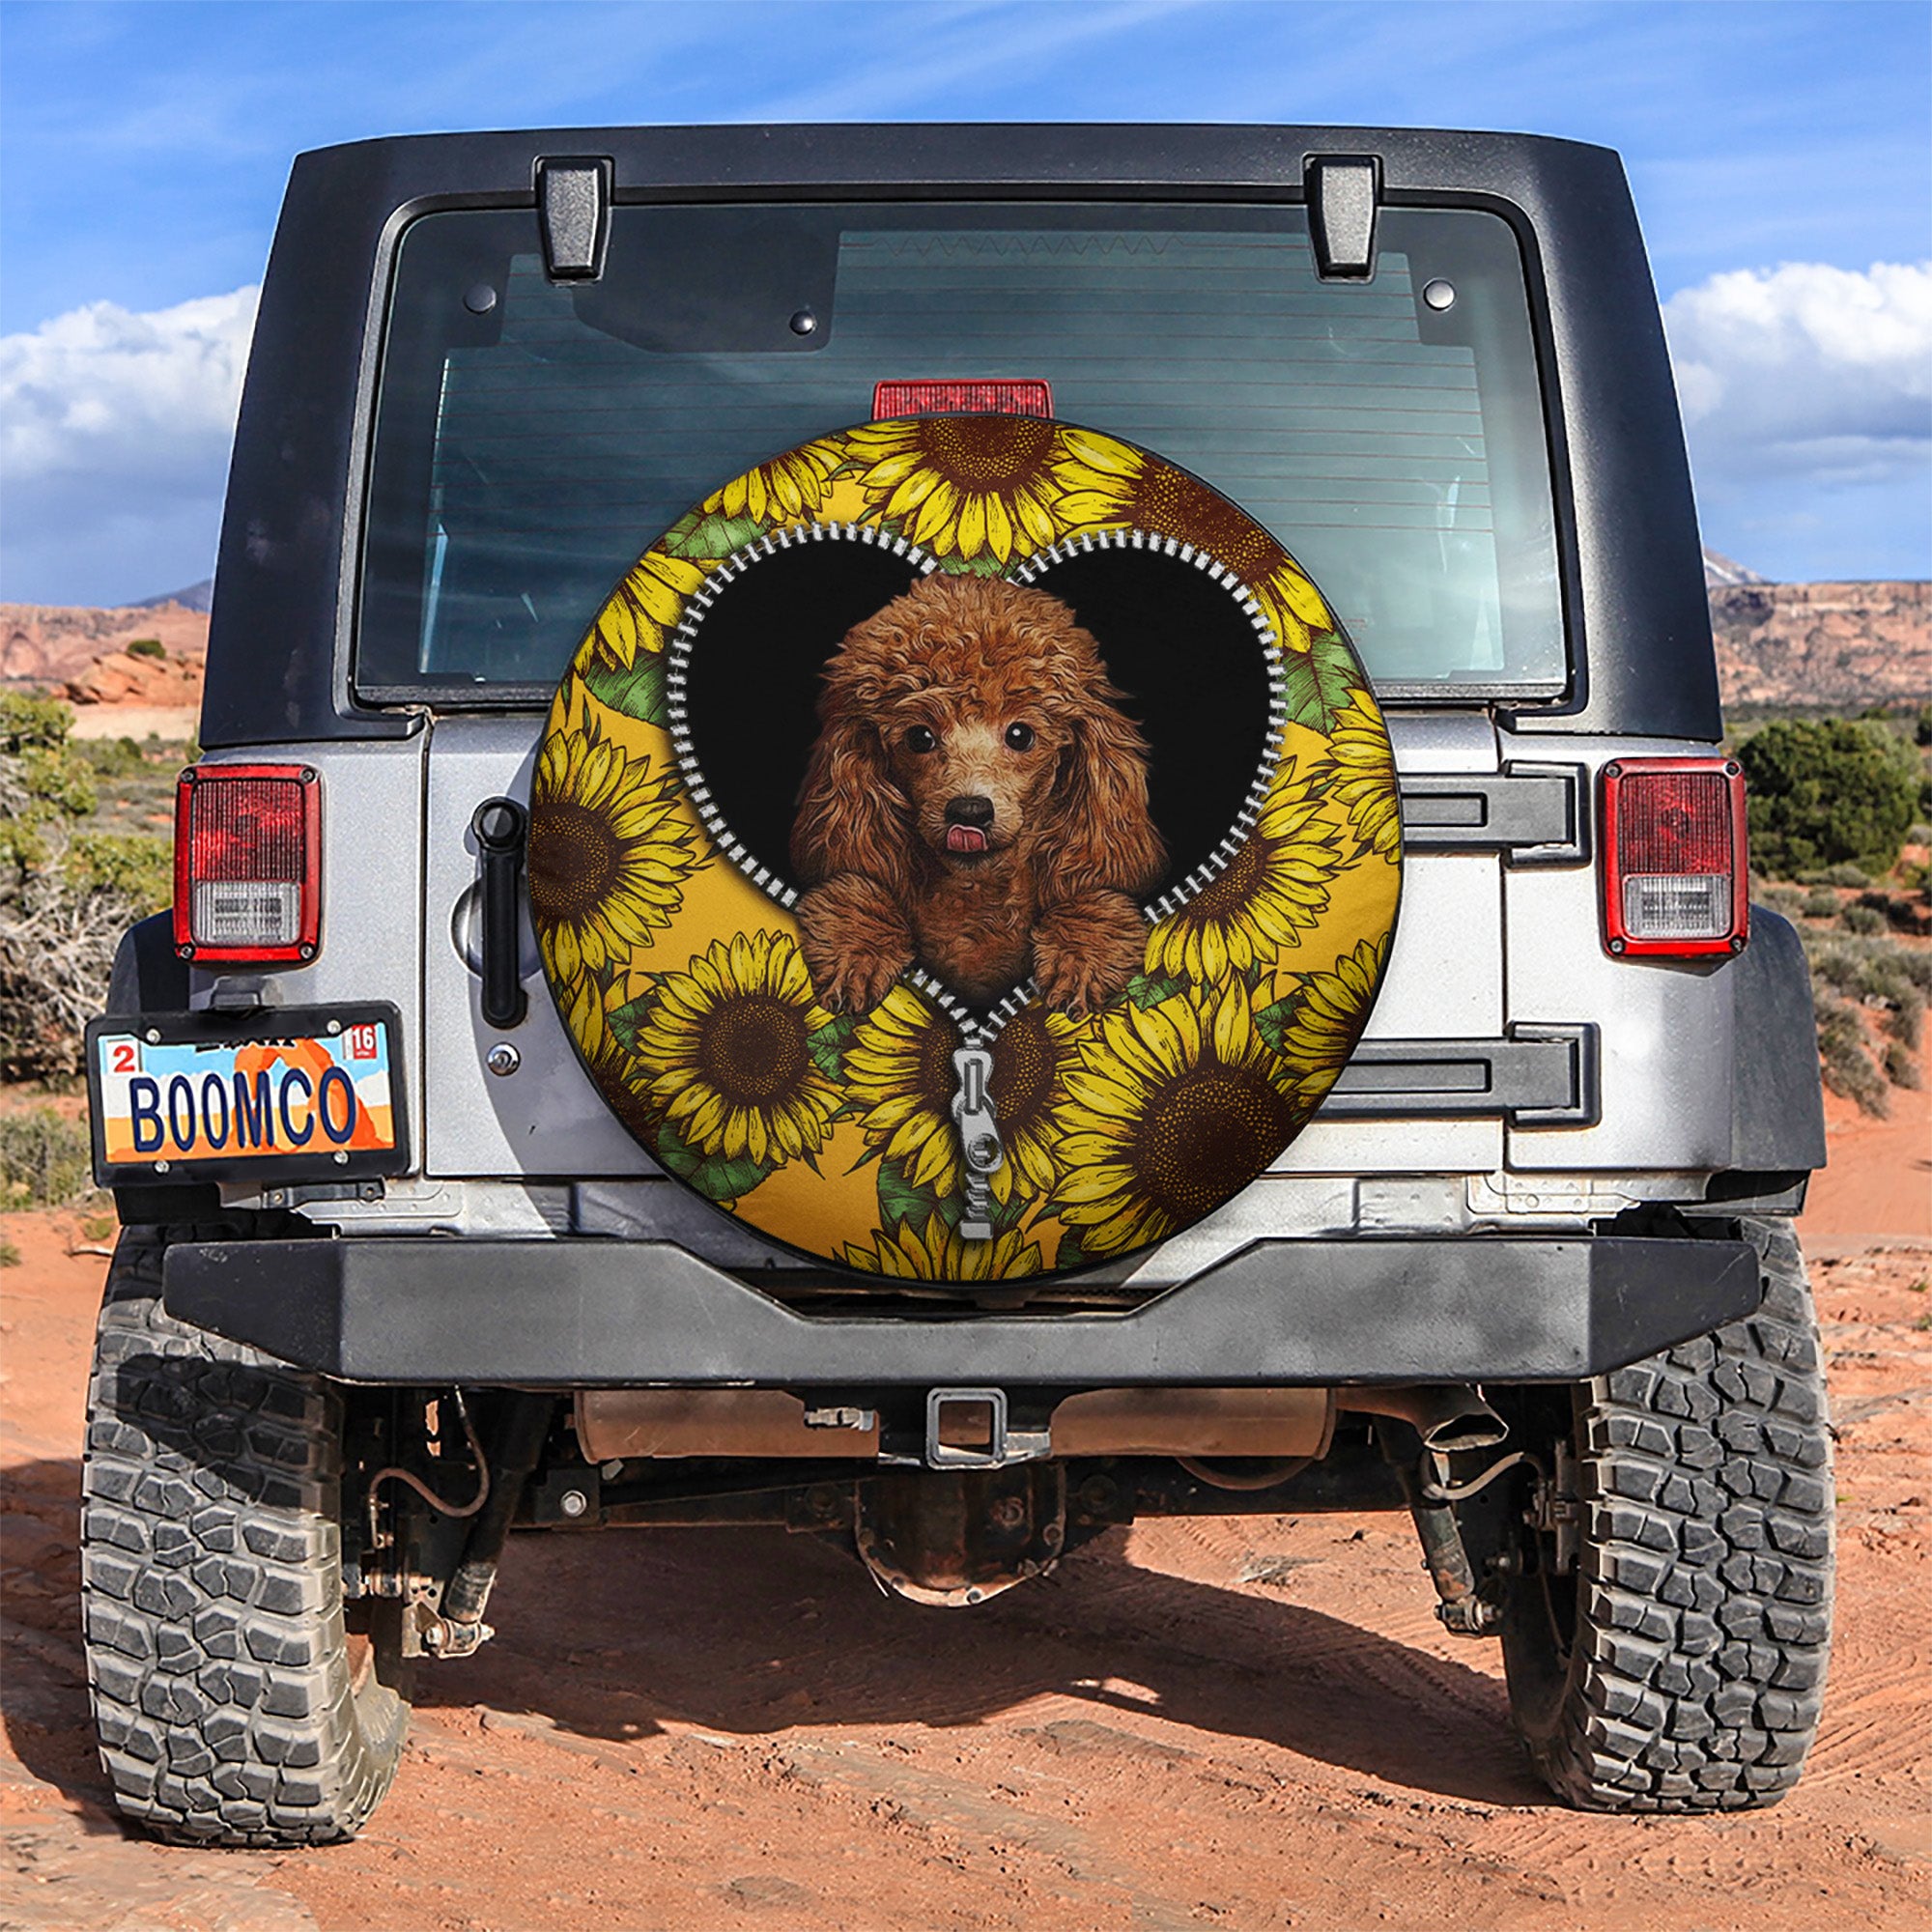 Cute Dog Sunflower Zipper Car Spare Tire Covers Gift For Campers Nearkii